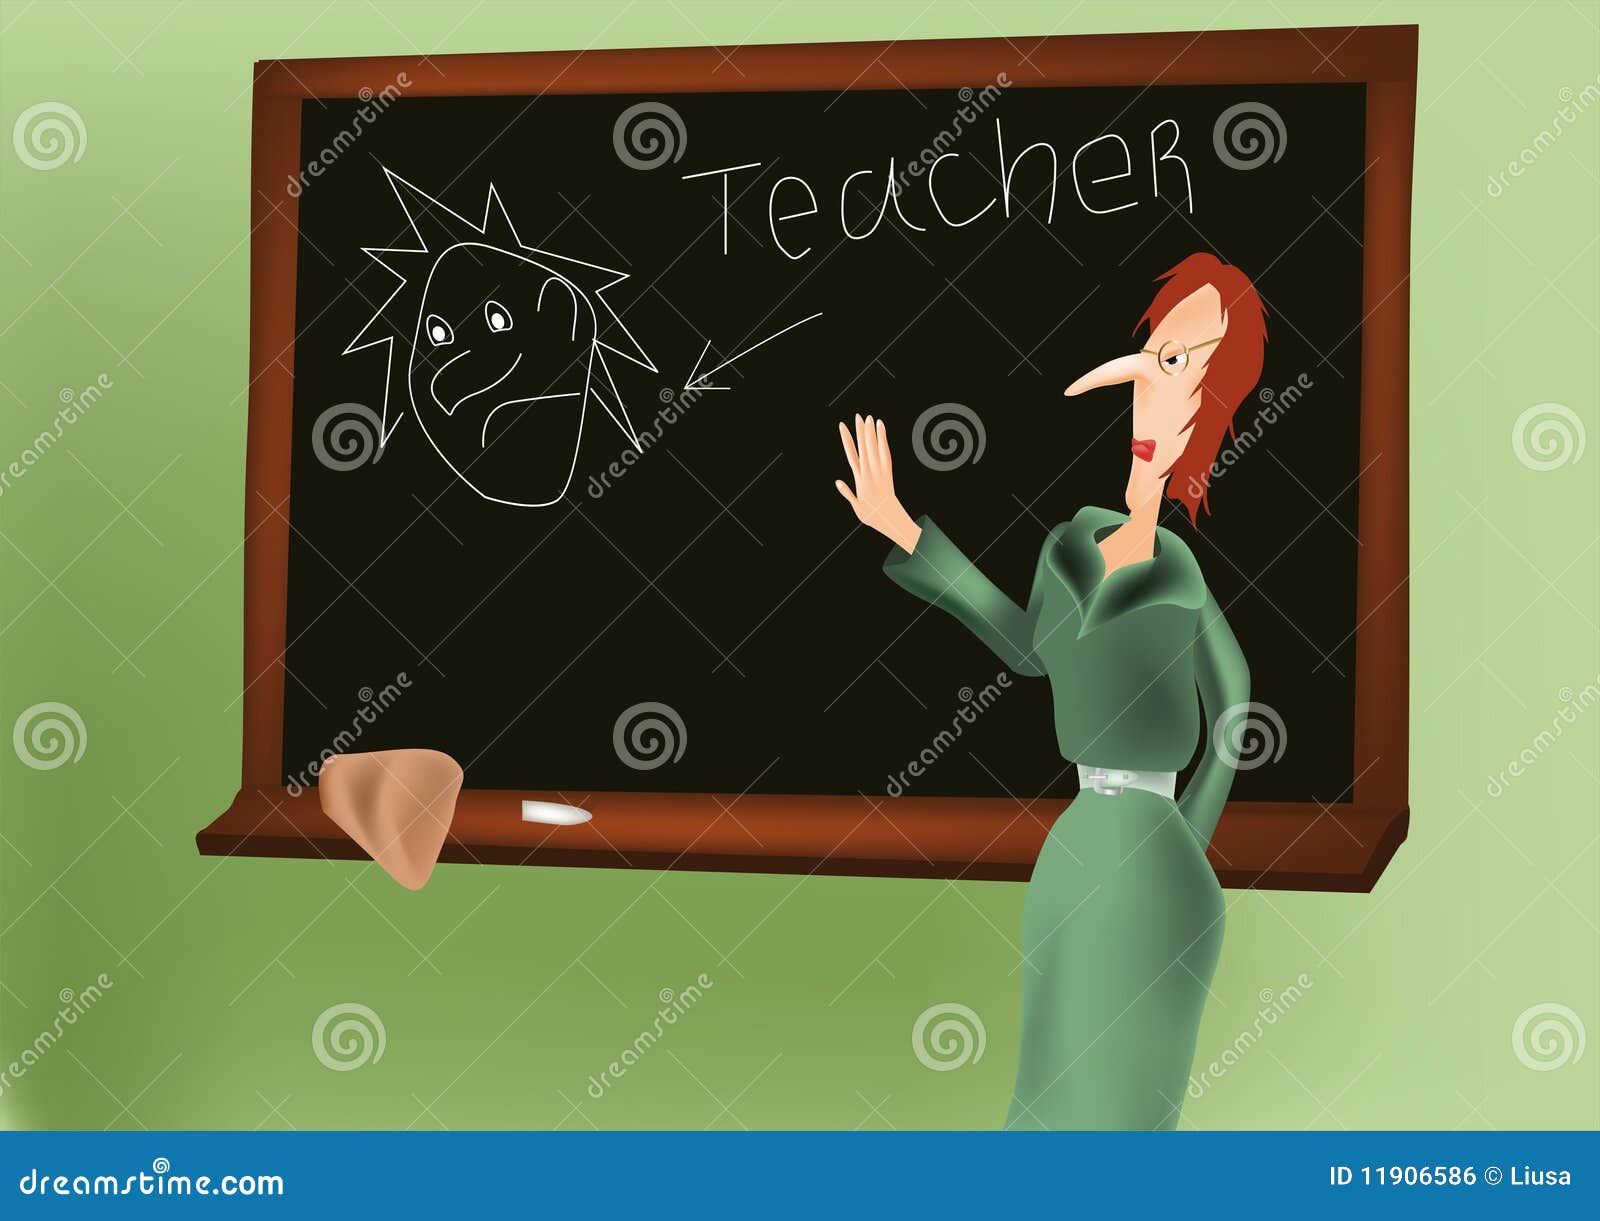 Teacher Background Images HD Pictures and Wallpaper For Free Download   Pngtree